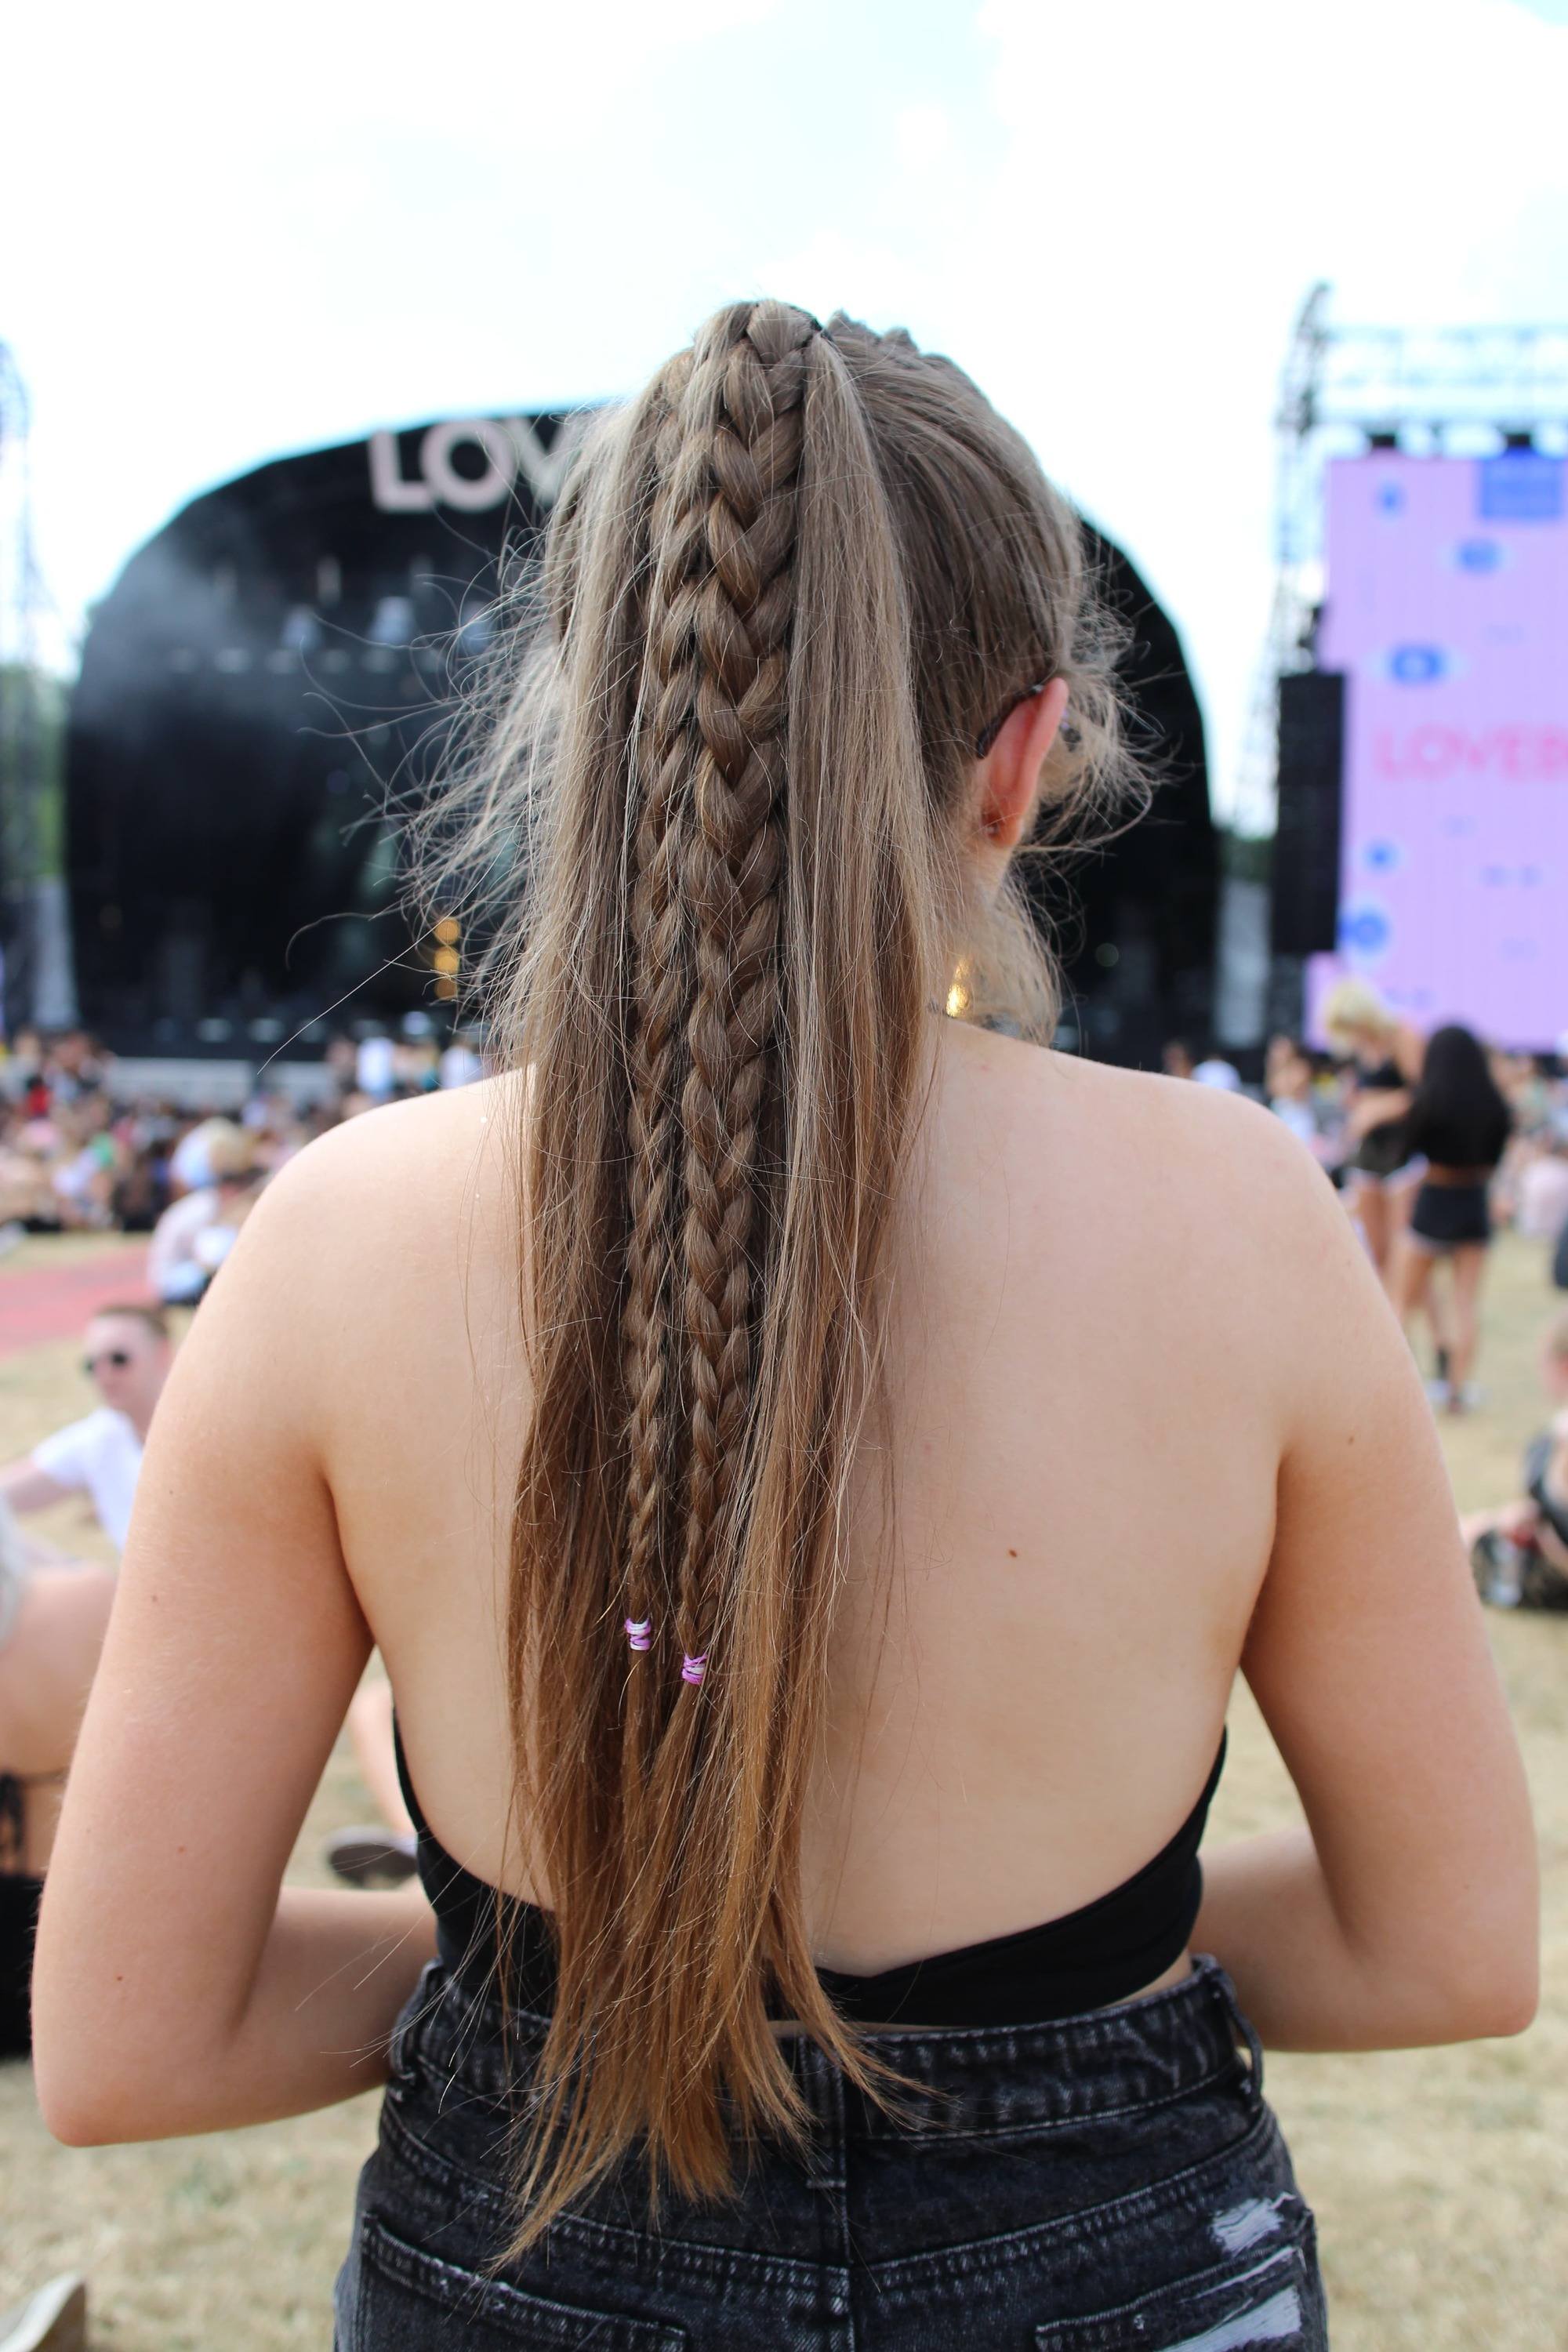 Lovebox 2018 festival hair: back view of girl with very long light brown straight hair in high ponytail with hidden braids through the length of the hair wearing a backless black top